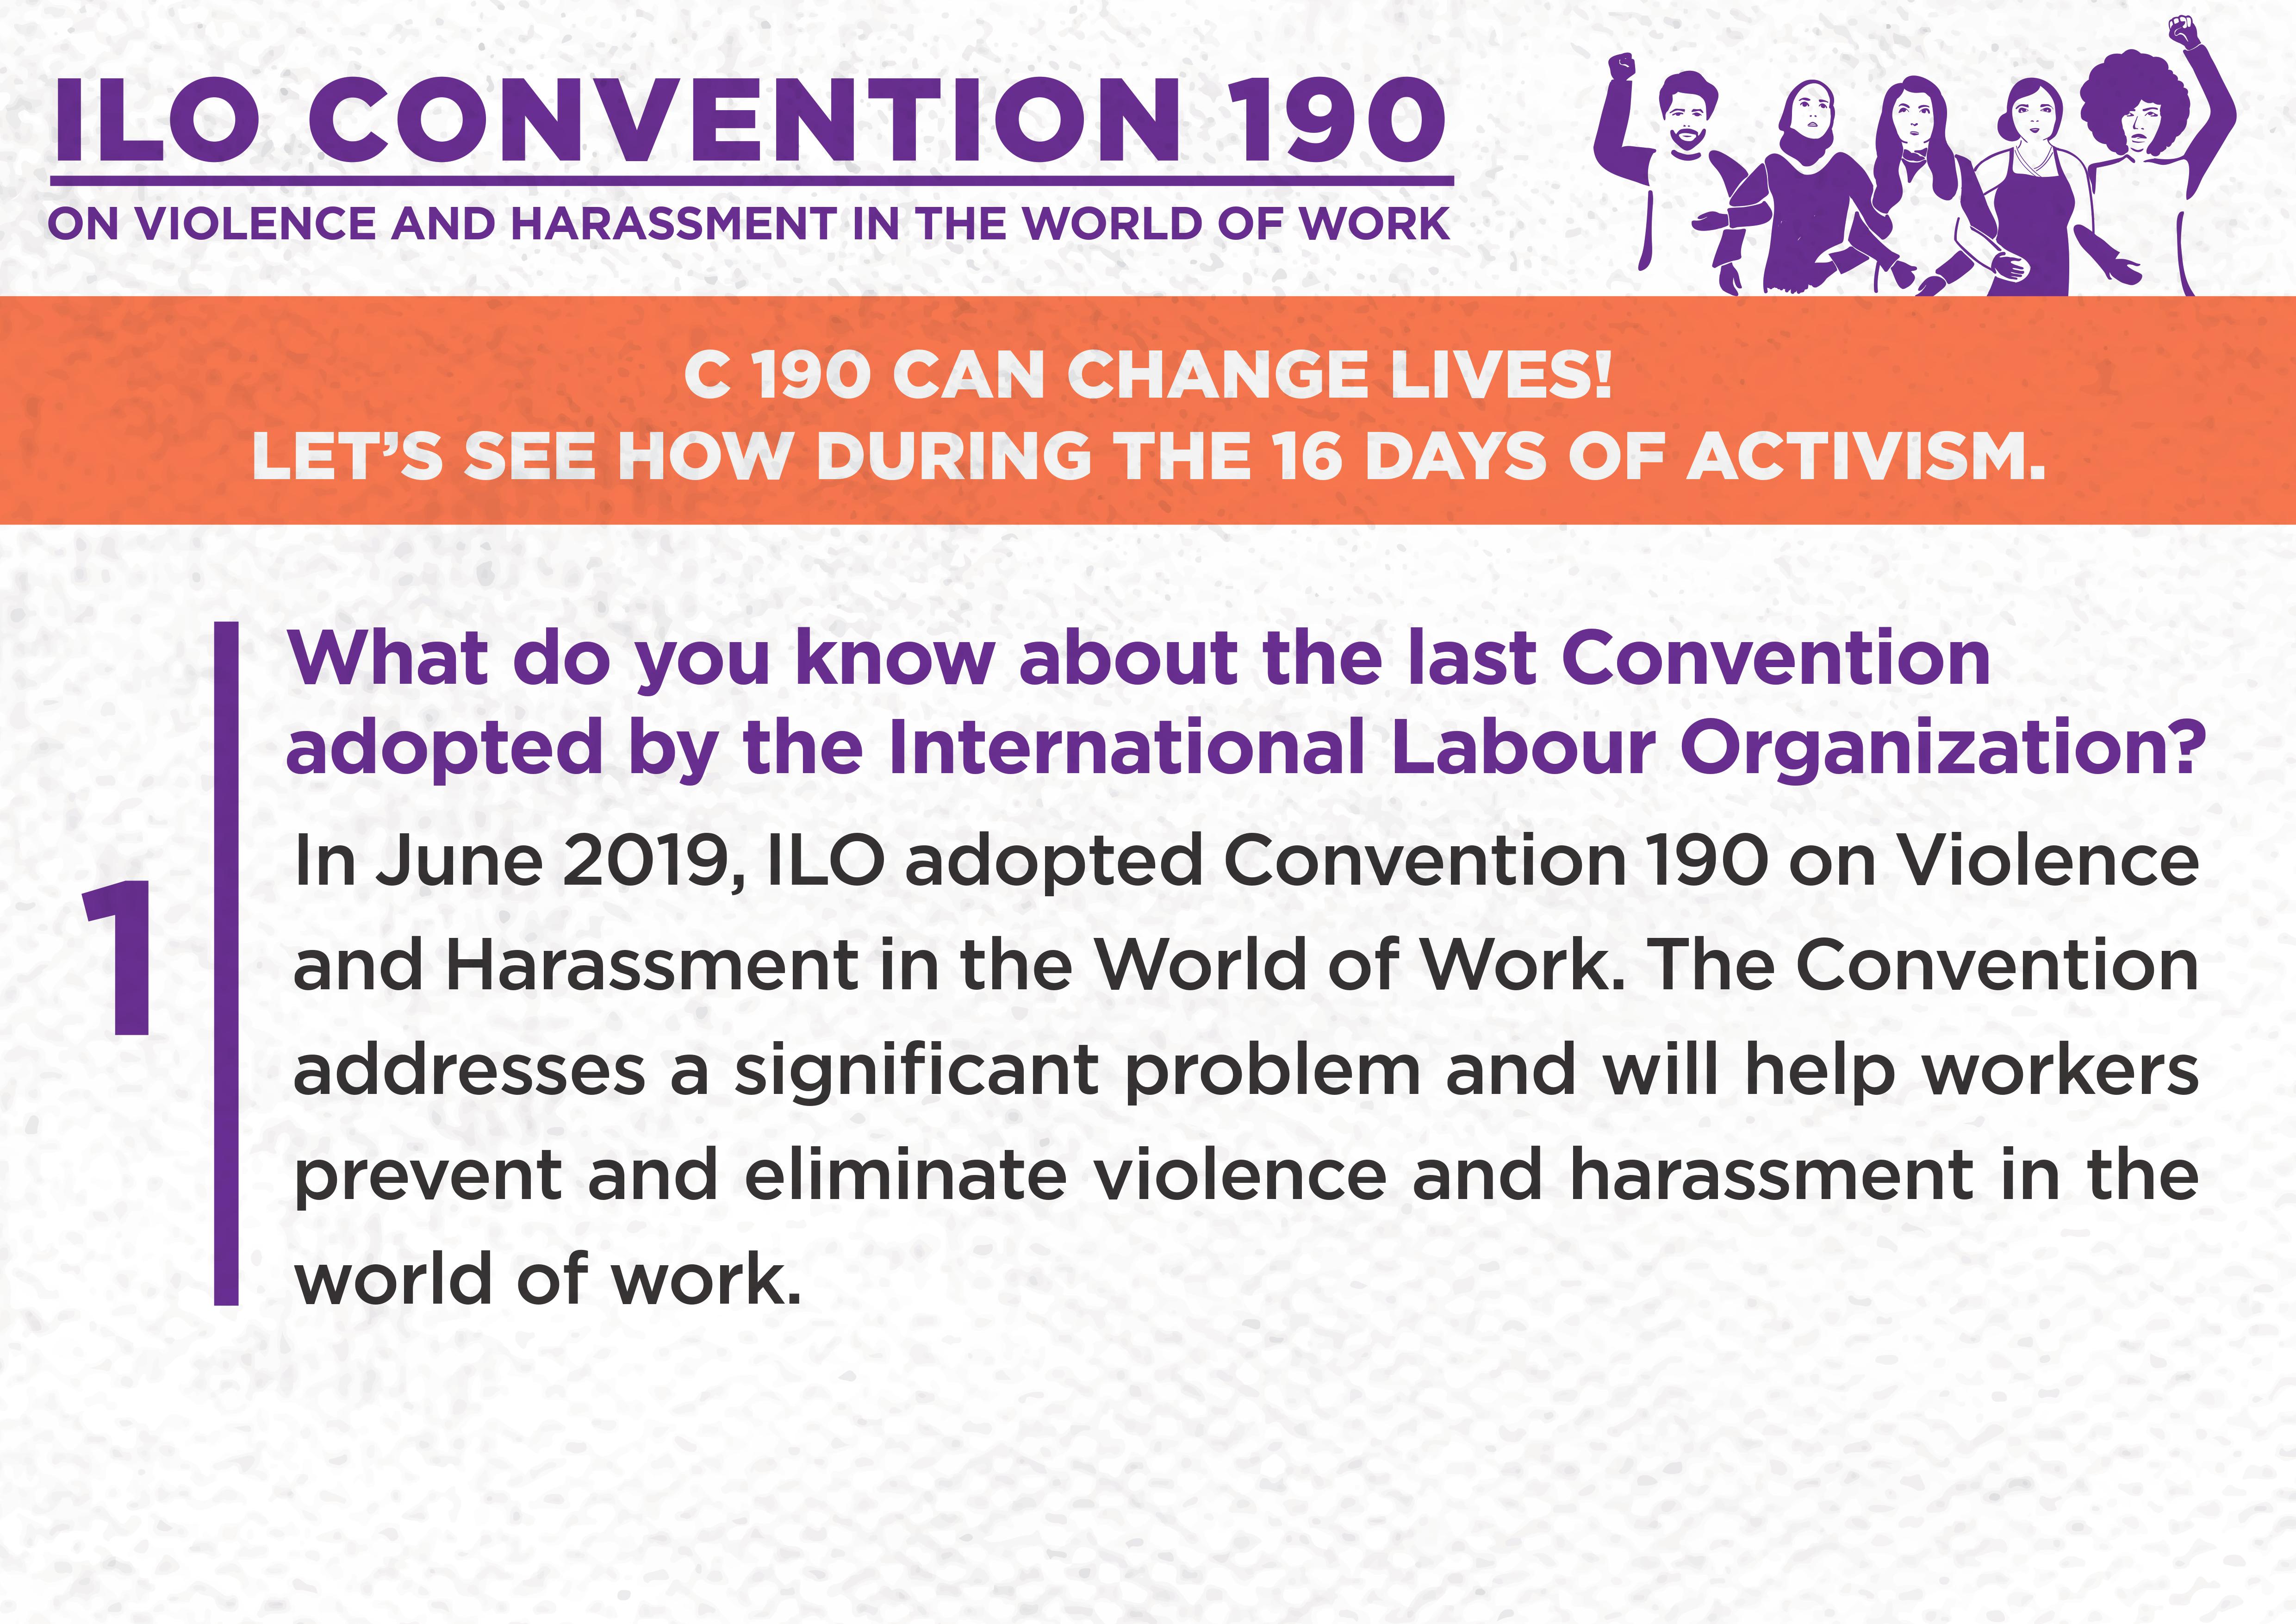 1. What do you know about the last Convention adopted by the International Labour Organization?